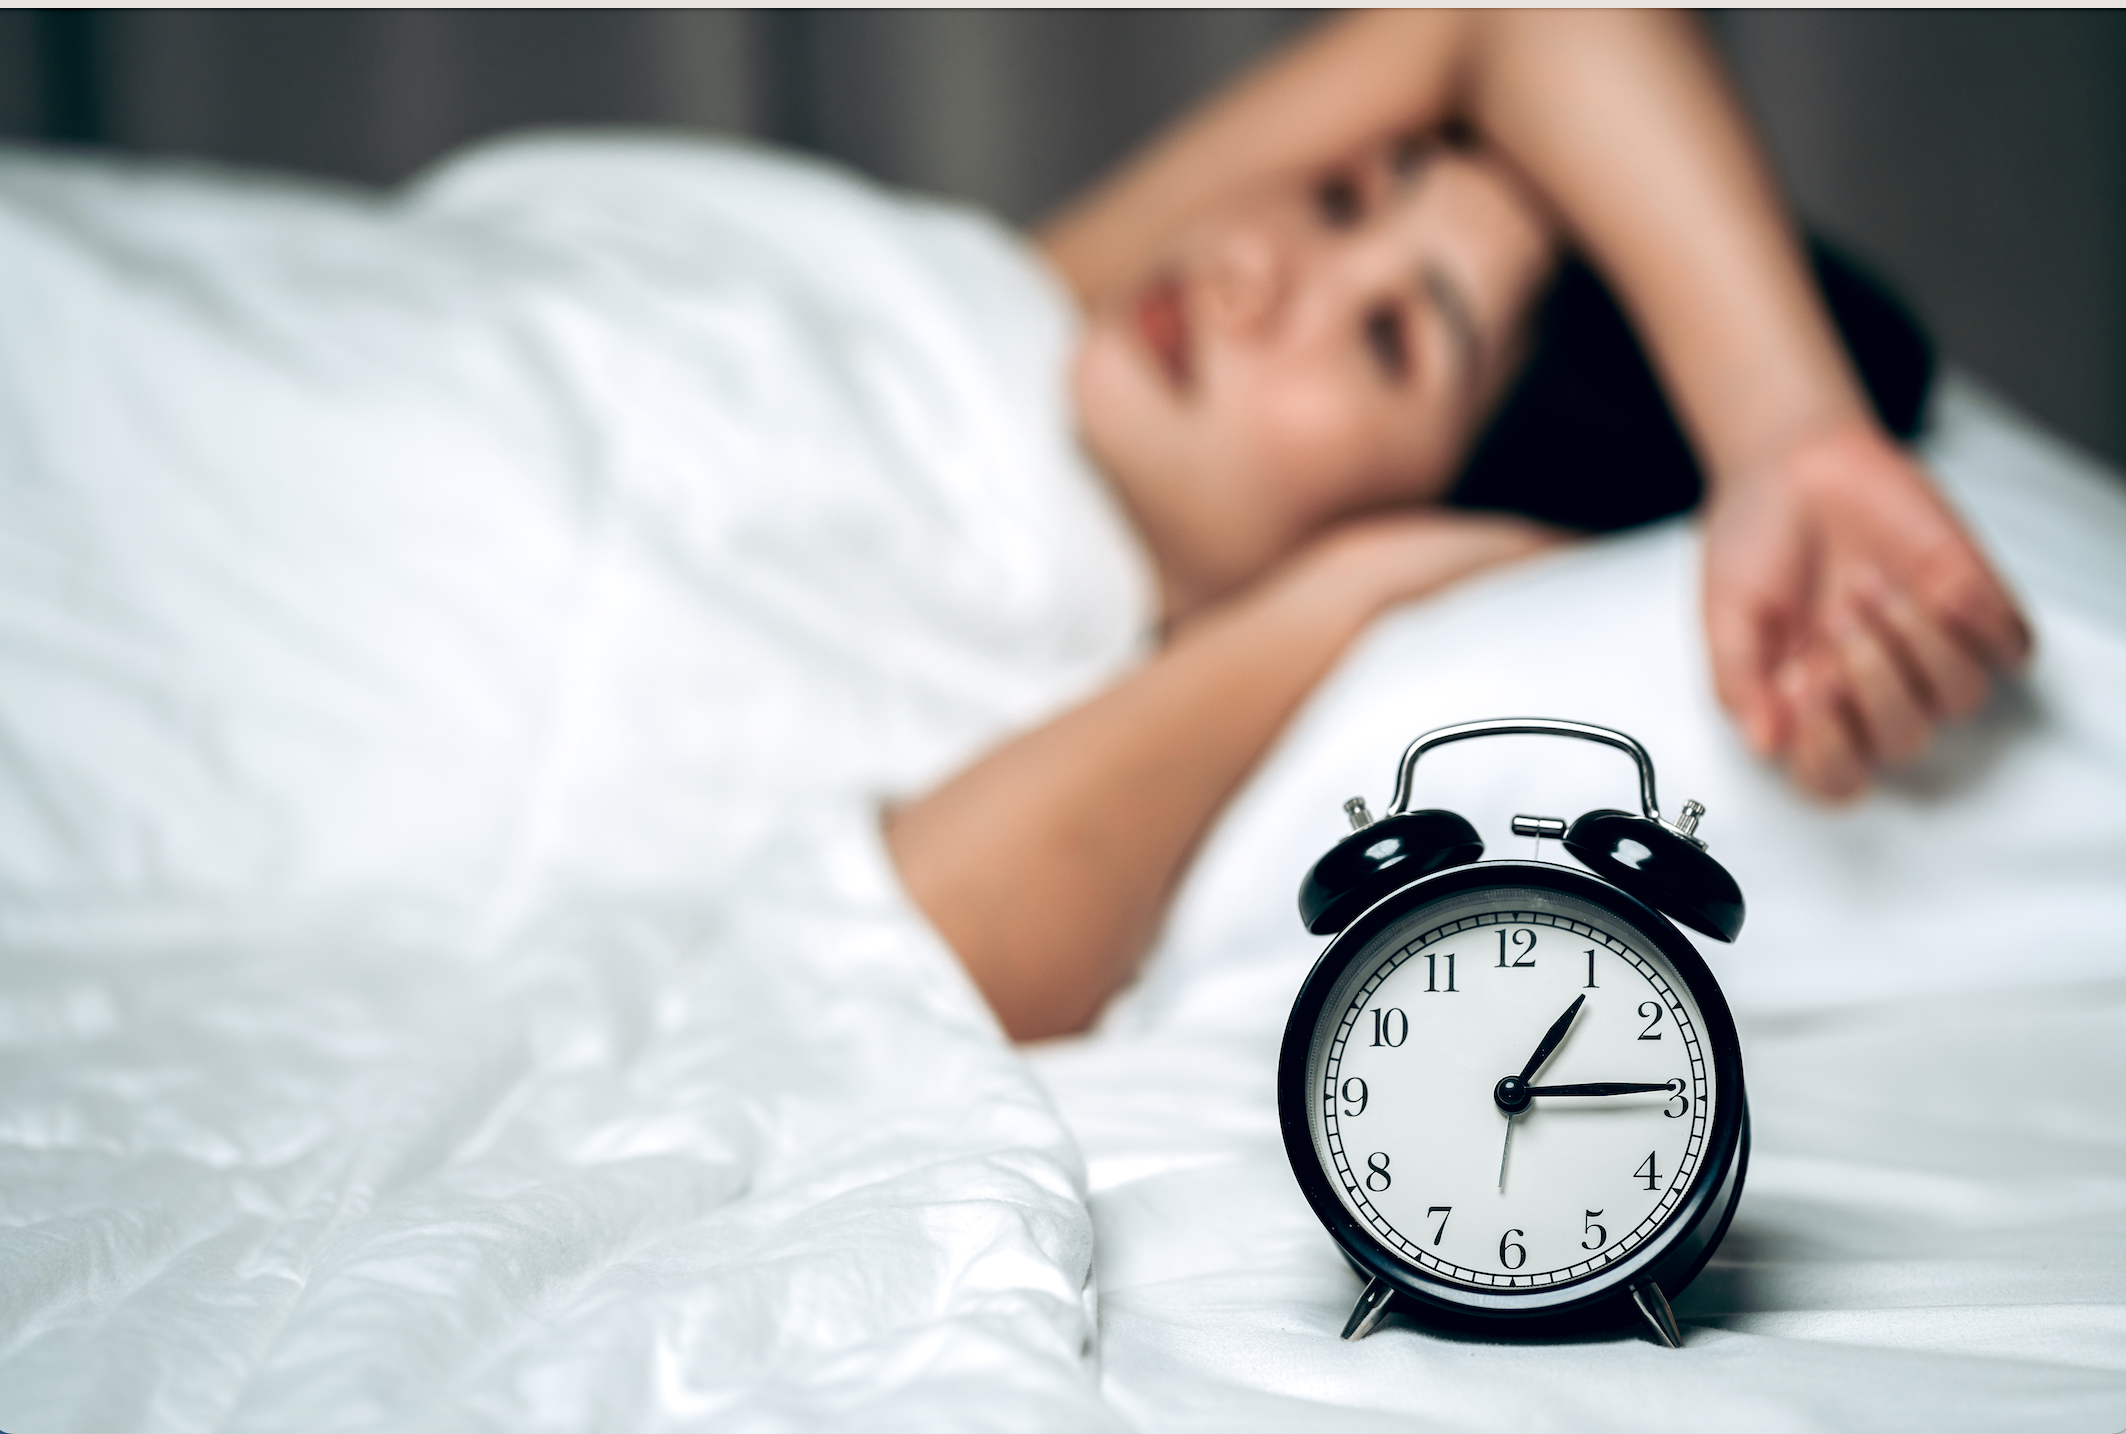 Positive Personality Traits May Impact Sleep Issues in Patients with RA